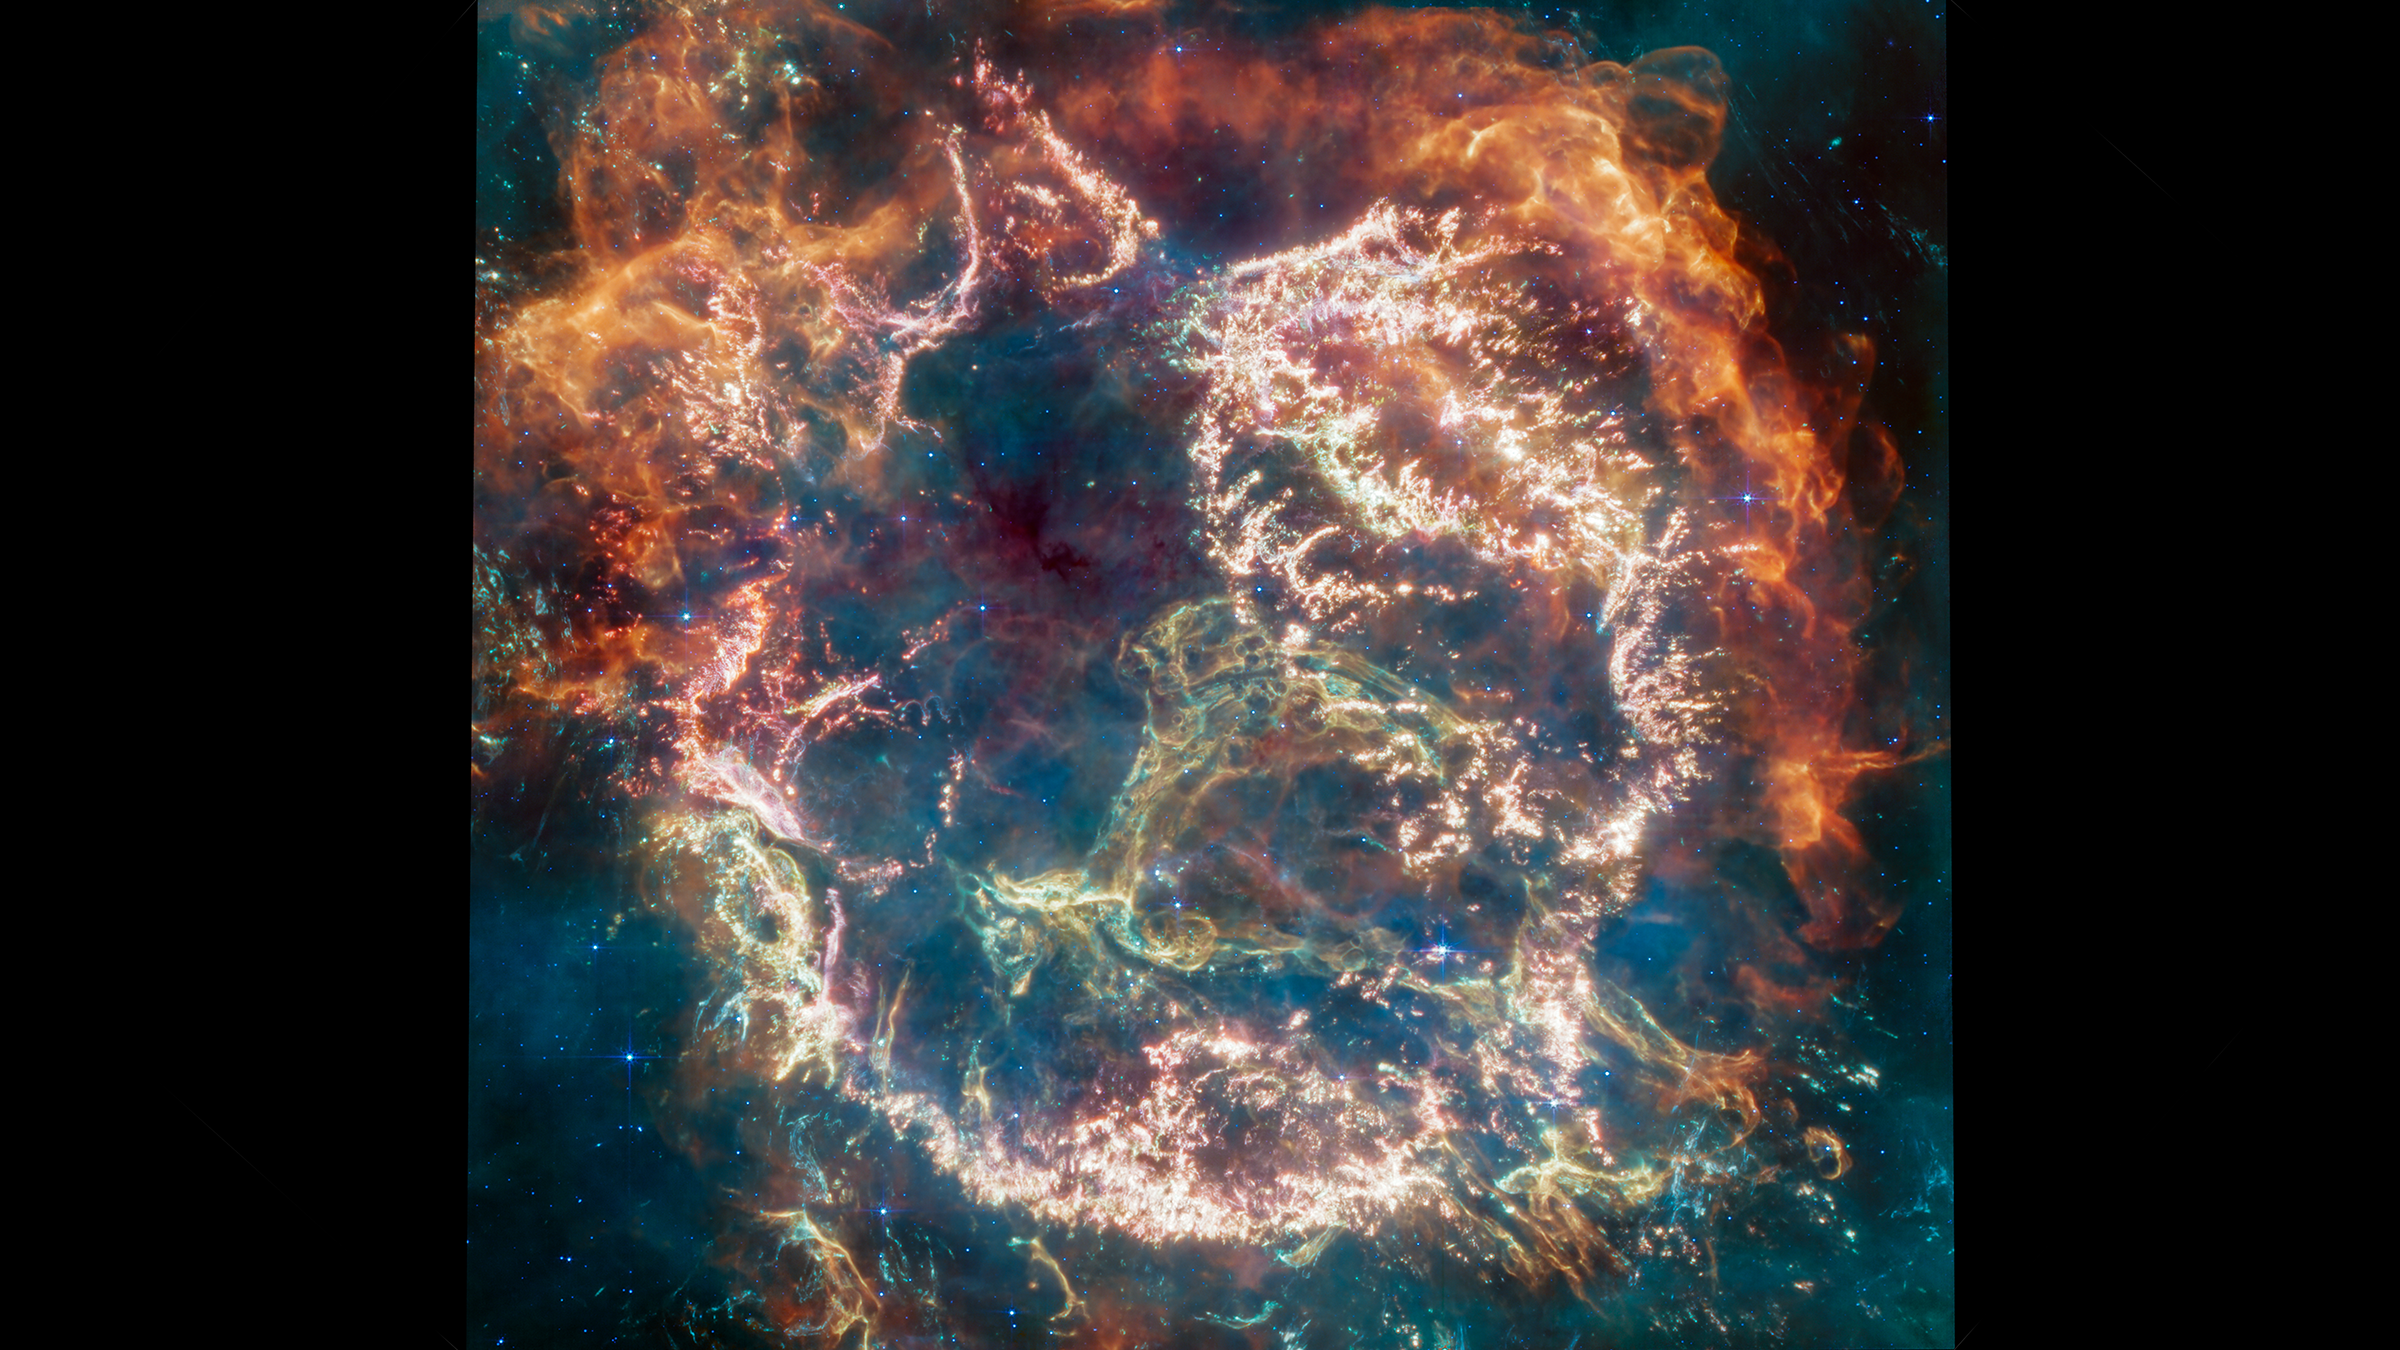 Colorful wisps of gas and dust are seen in this telescope image of the remains of a supernova explosion